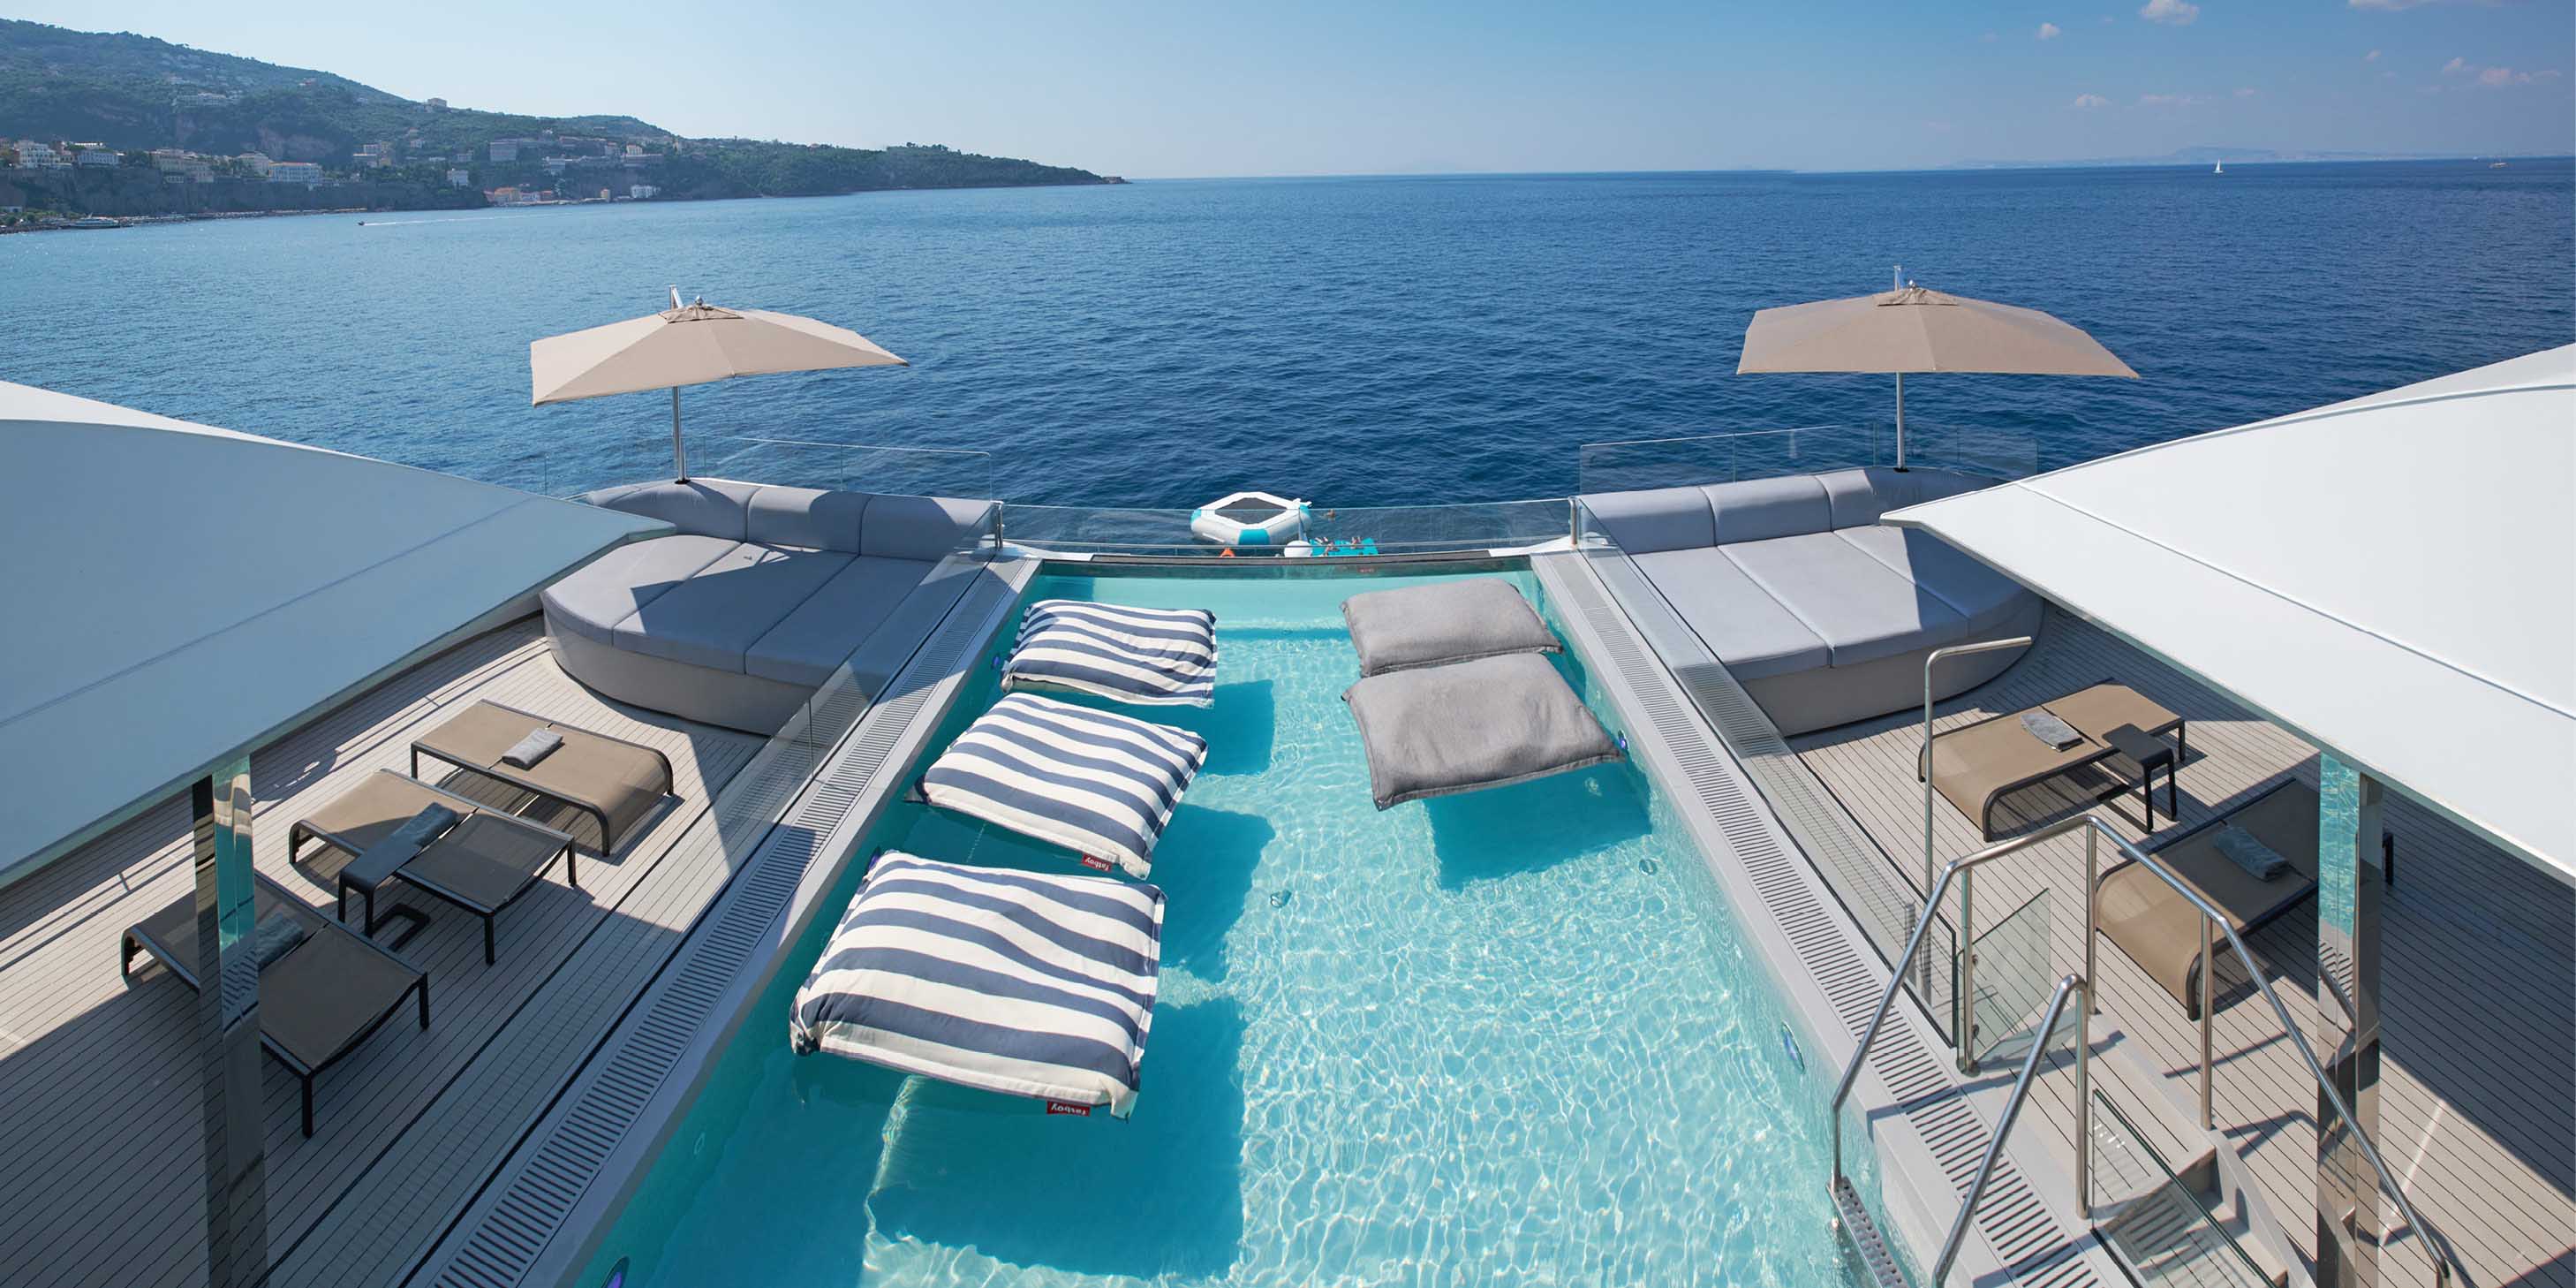 Outdoor infinity pool at the aft of a luxury yacht